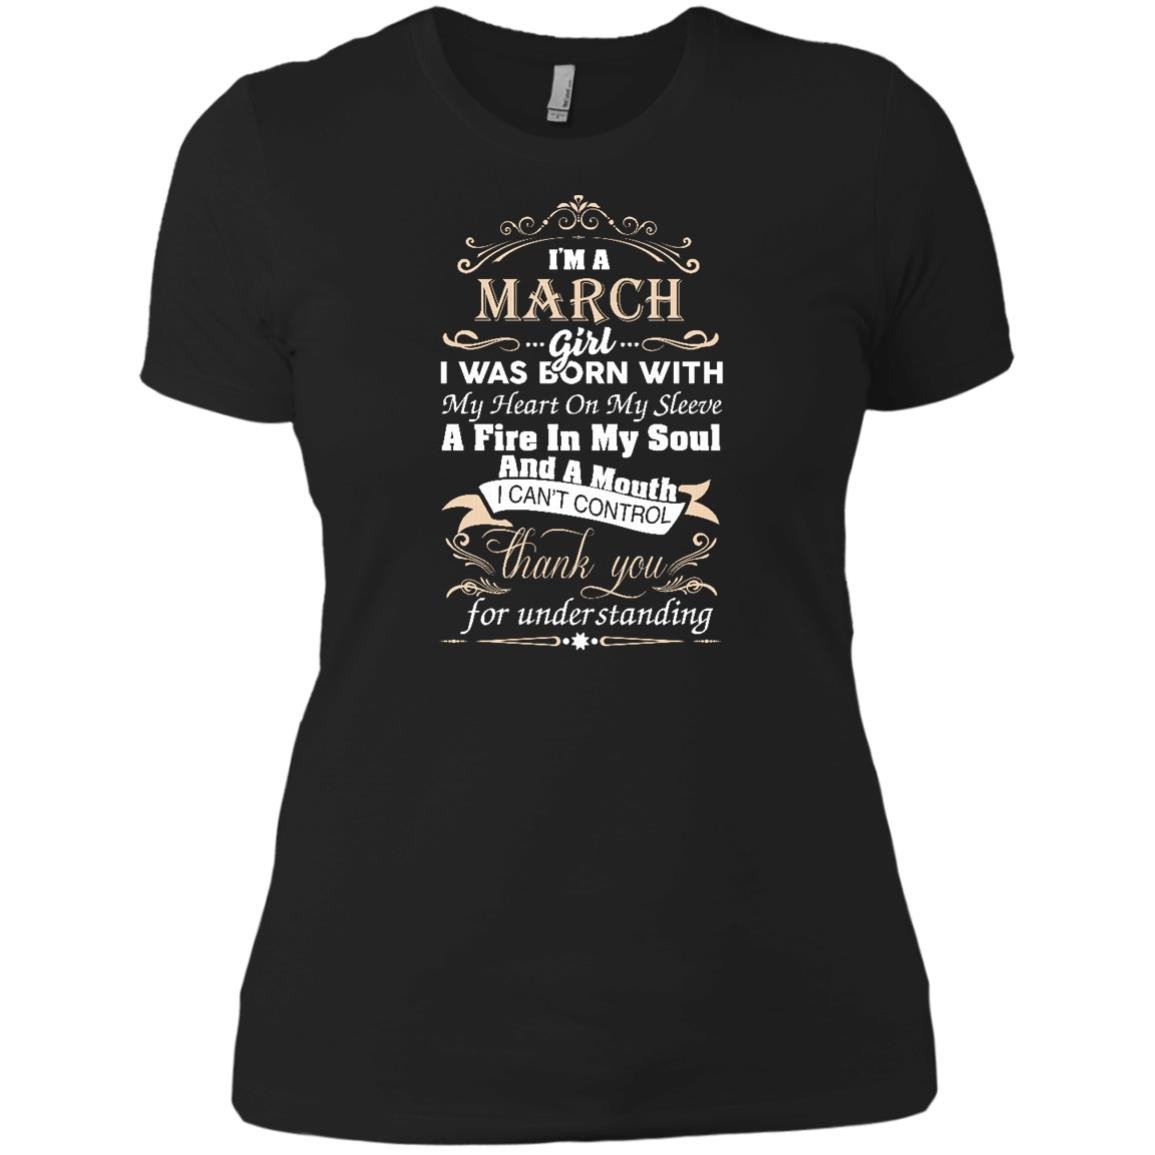 I am a March girl birth day T-shirt gift